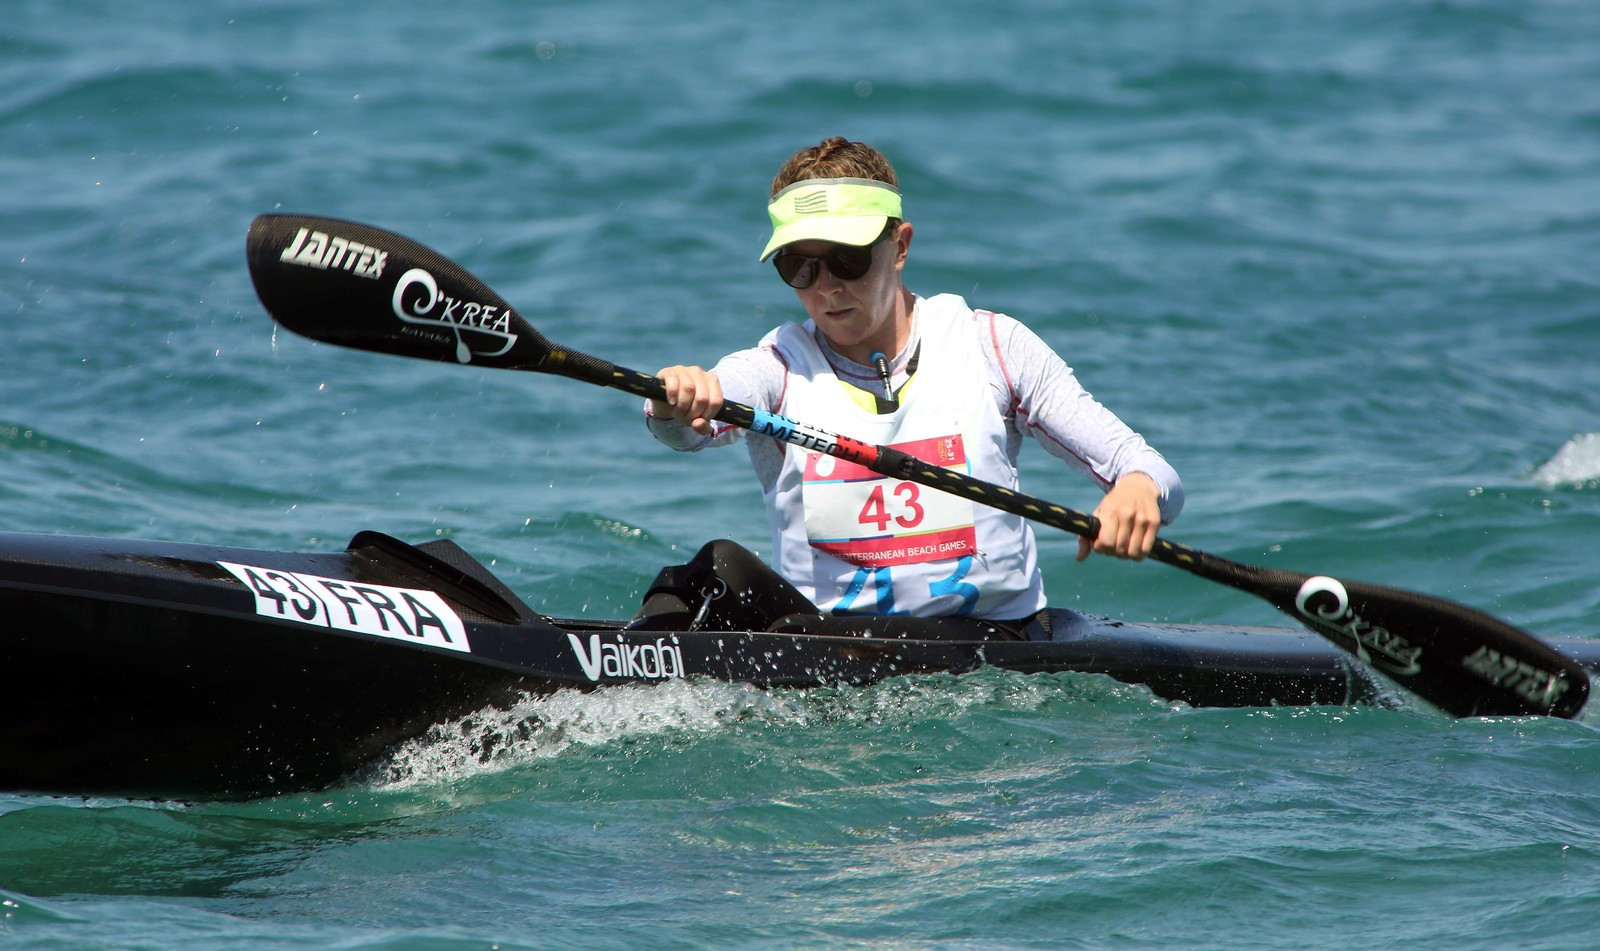 France's Angie Le Roux won the women's canoe ocean racing event ©Patras 2019